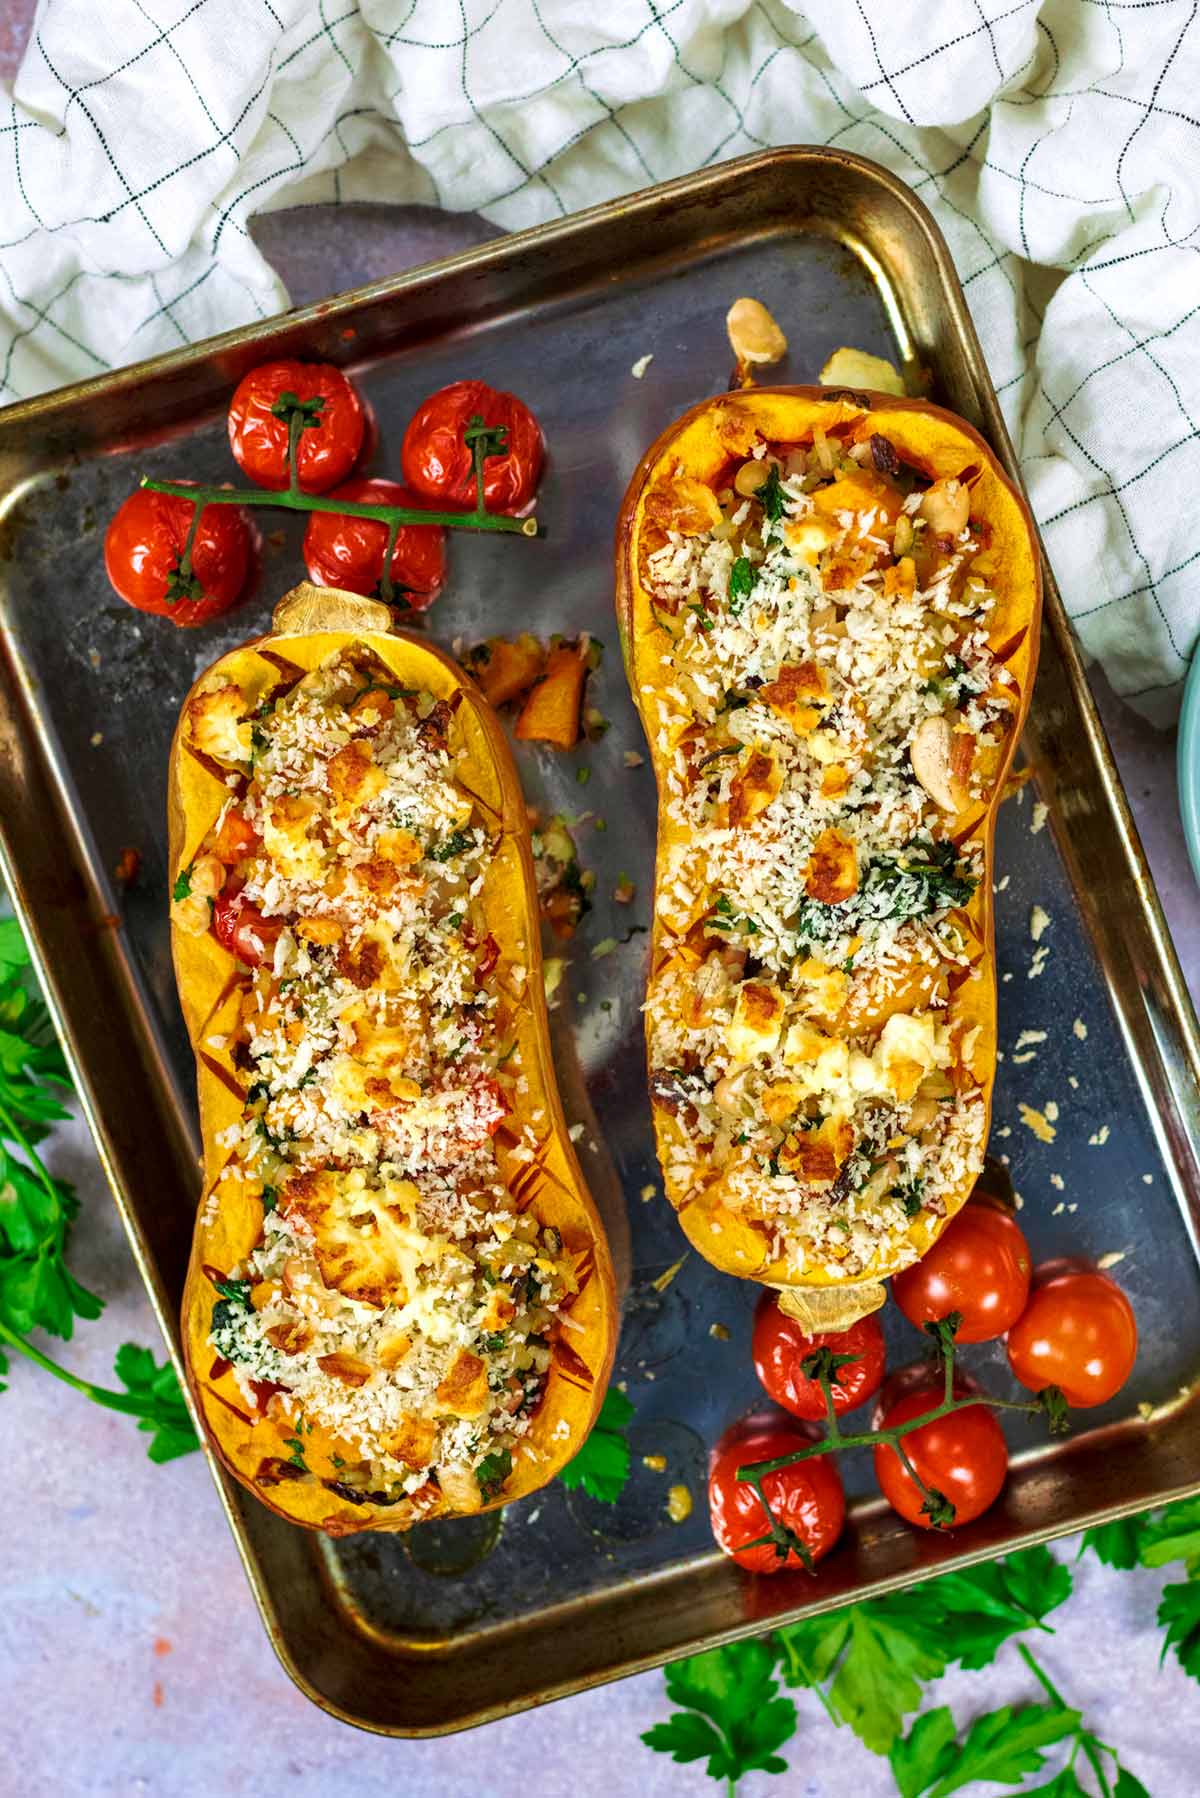 Two butternut squash halves stuffed with rice, vegetables and cheese.